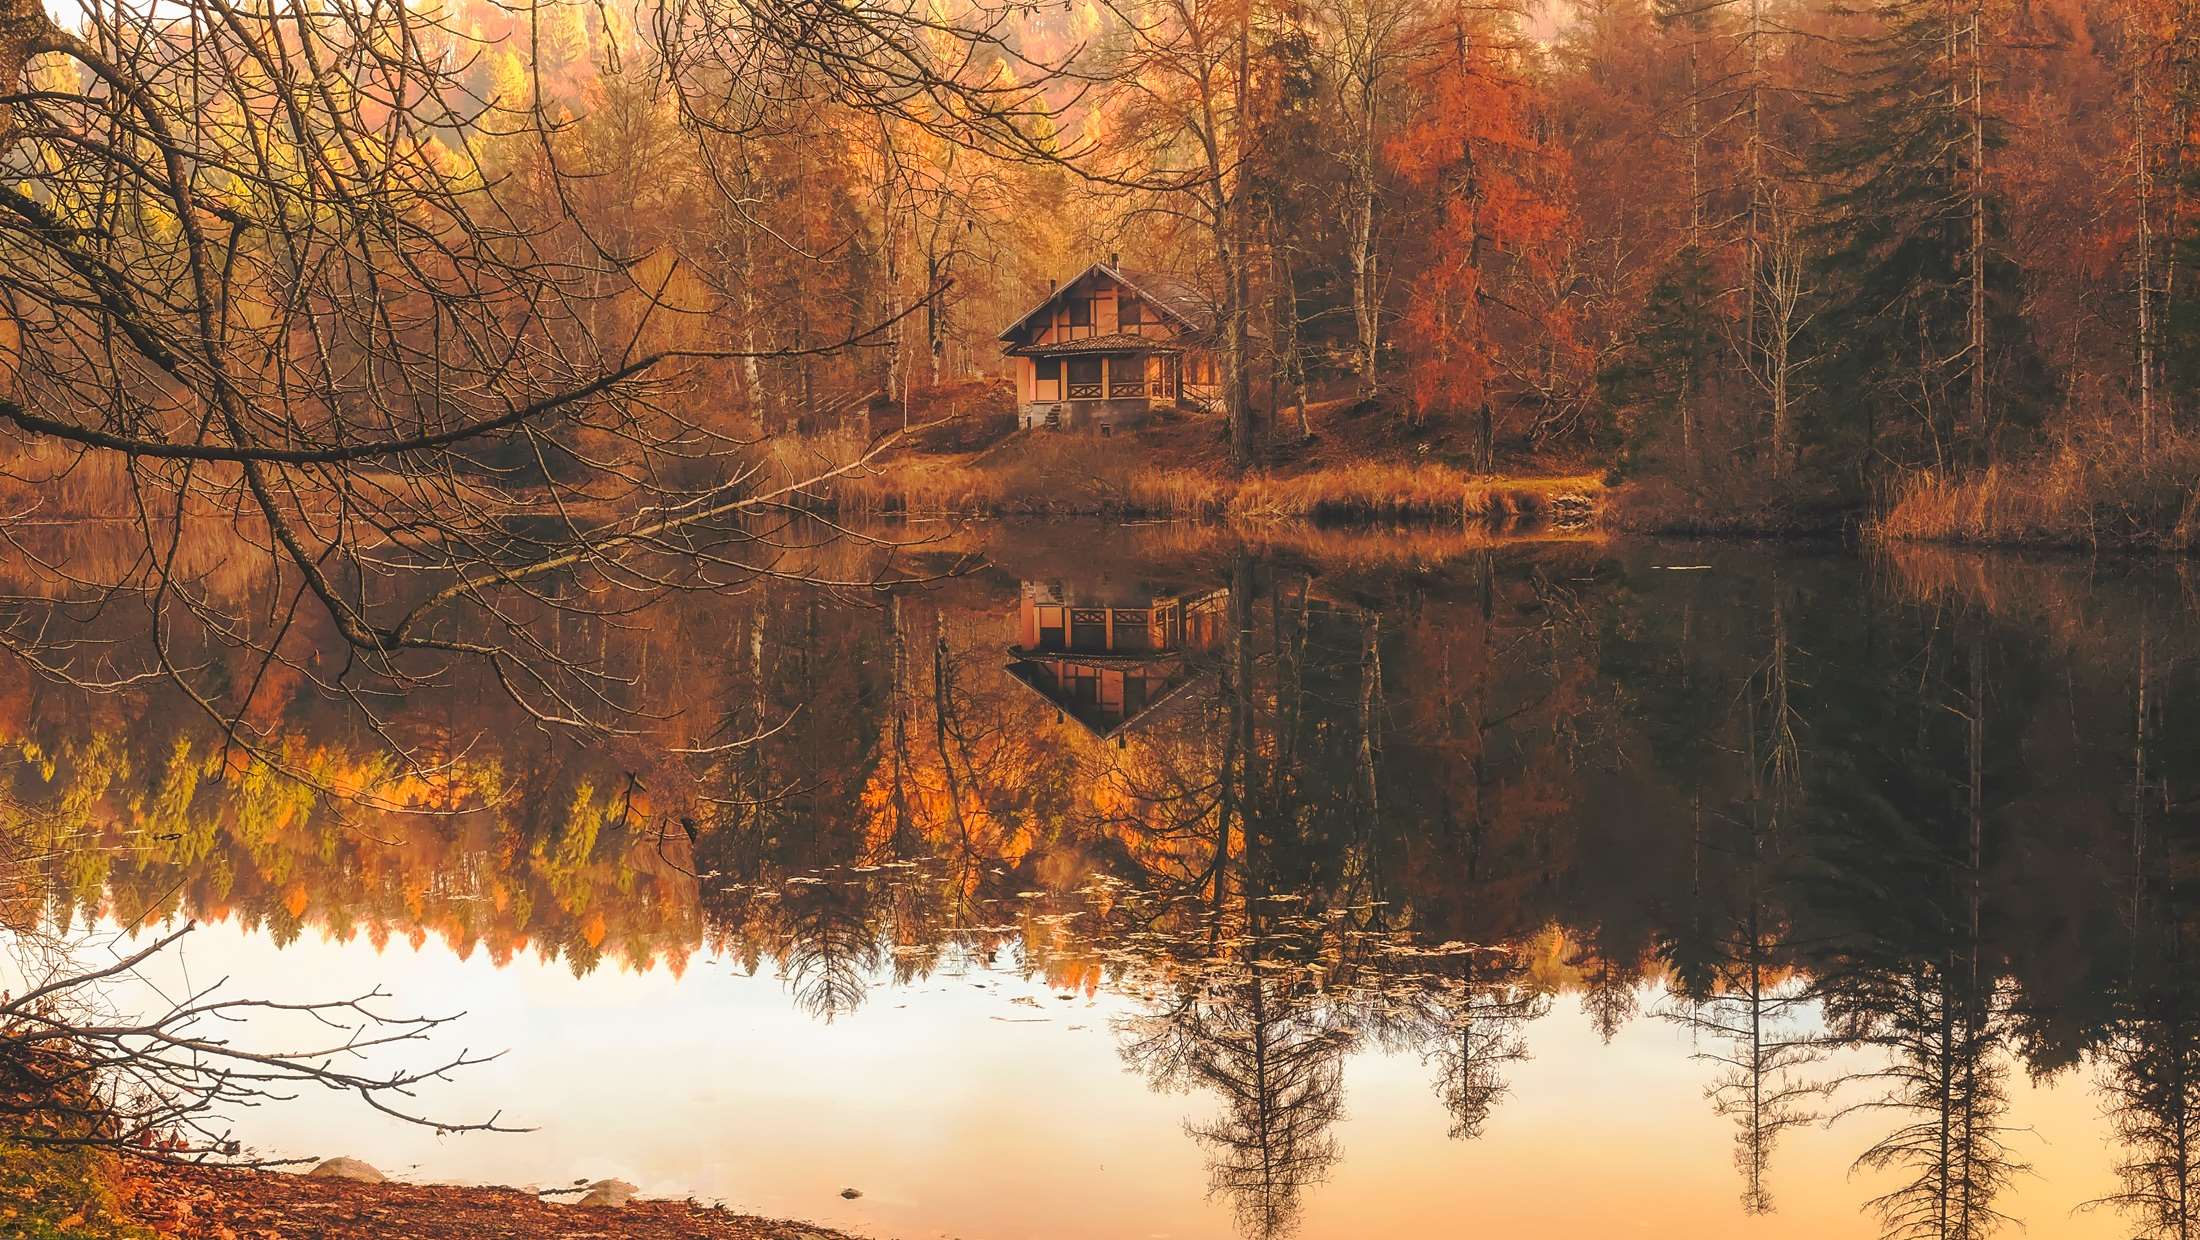 autumn, beautiful, cabin, cottage, country, fall